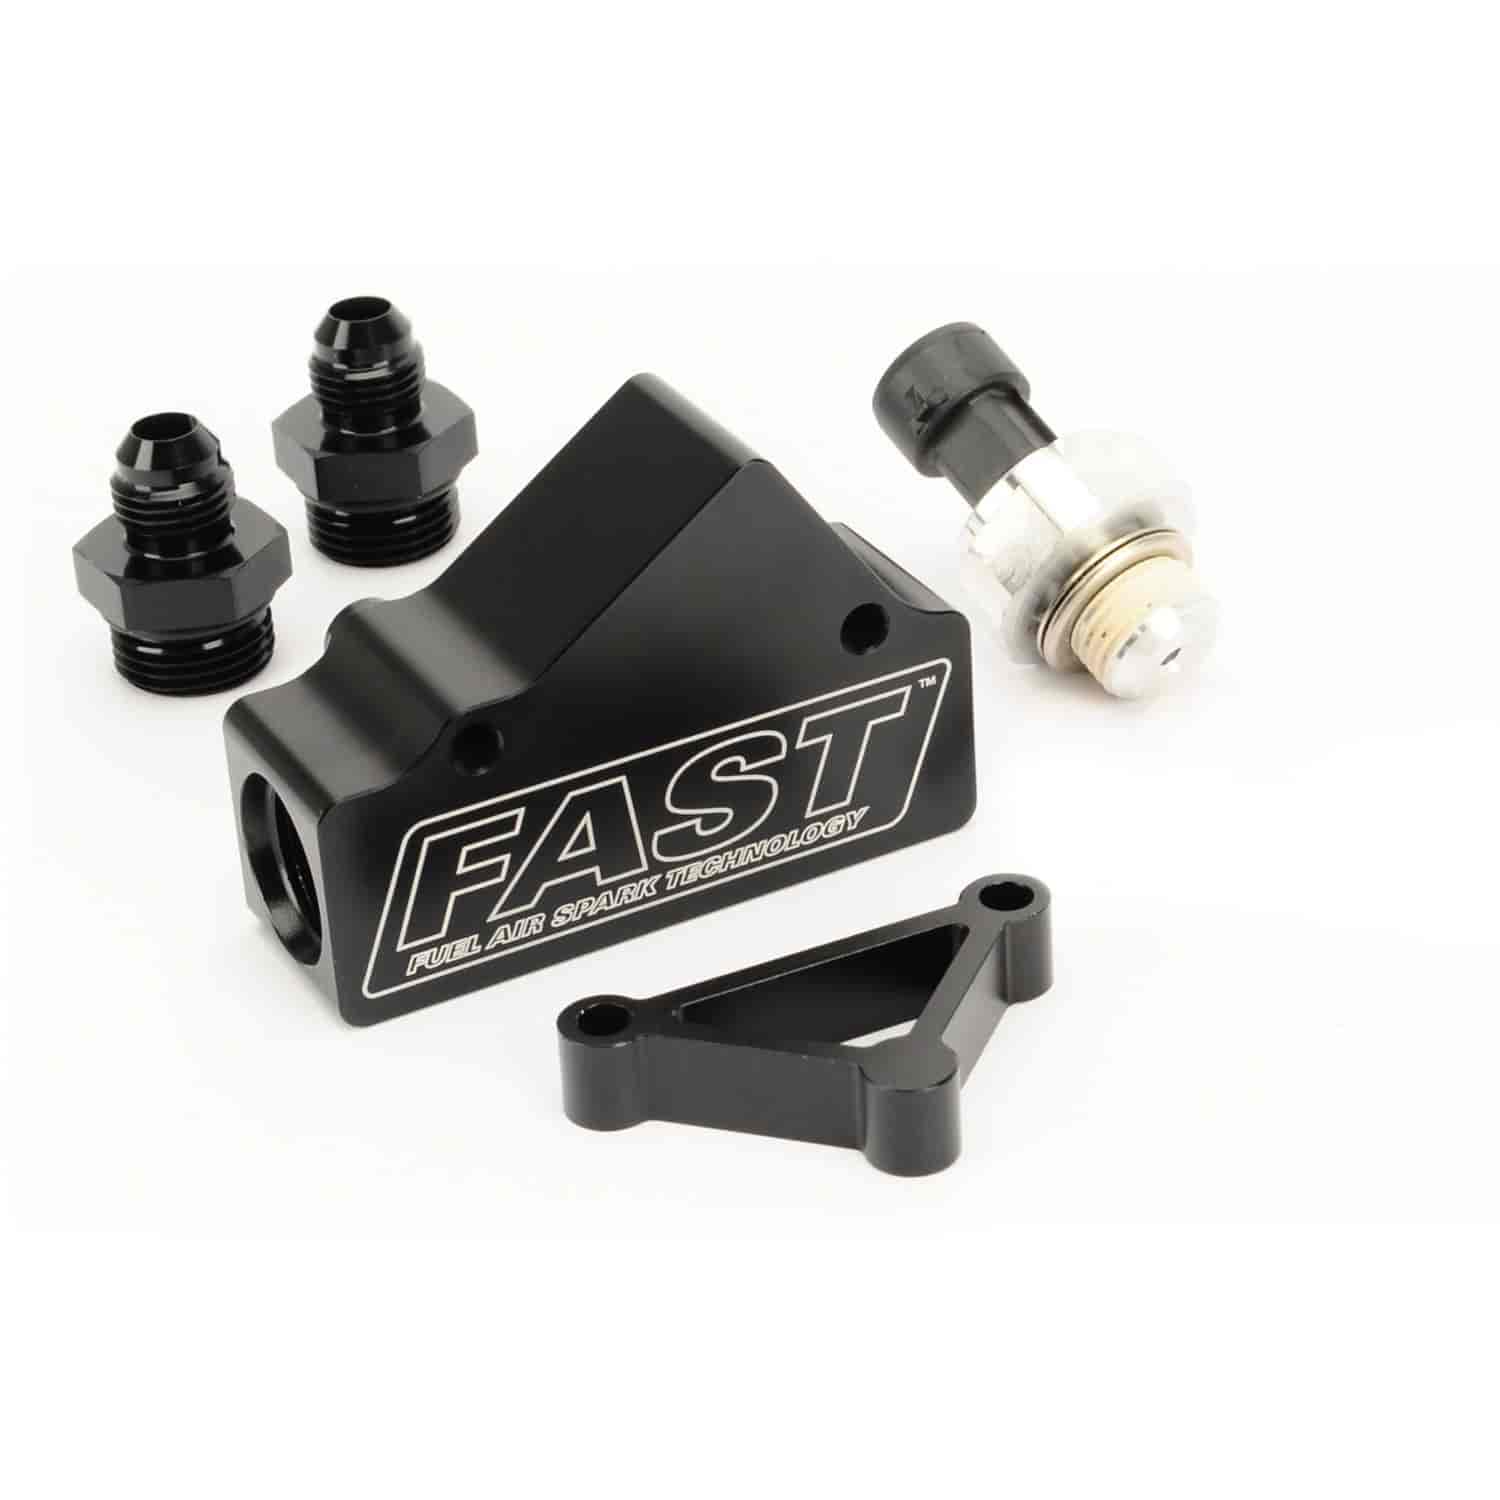 ELECTRONIC FUEL PRESSURE KIT